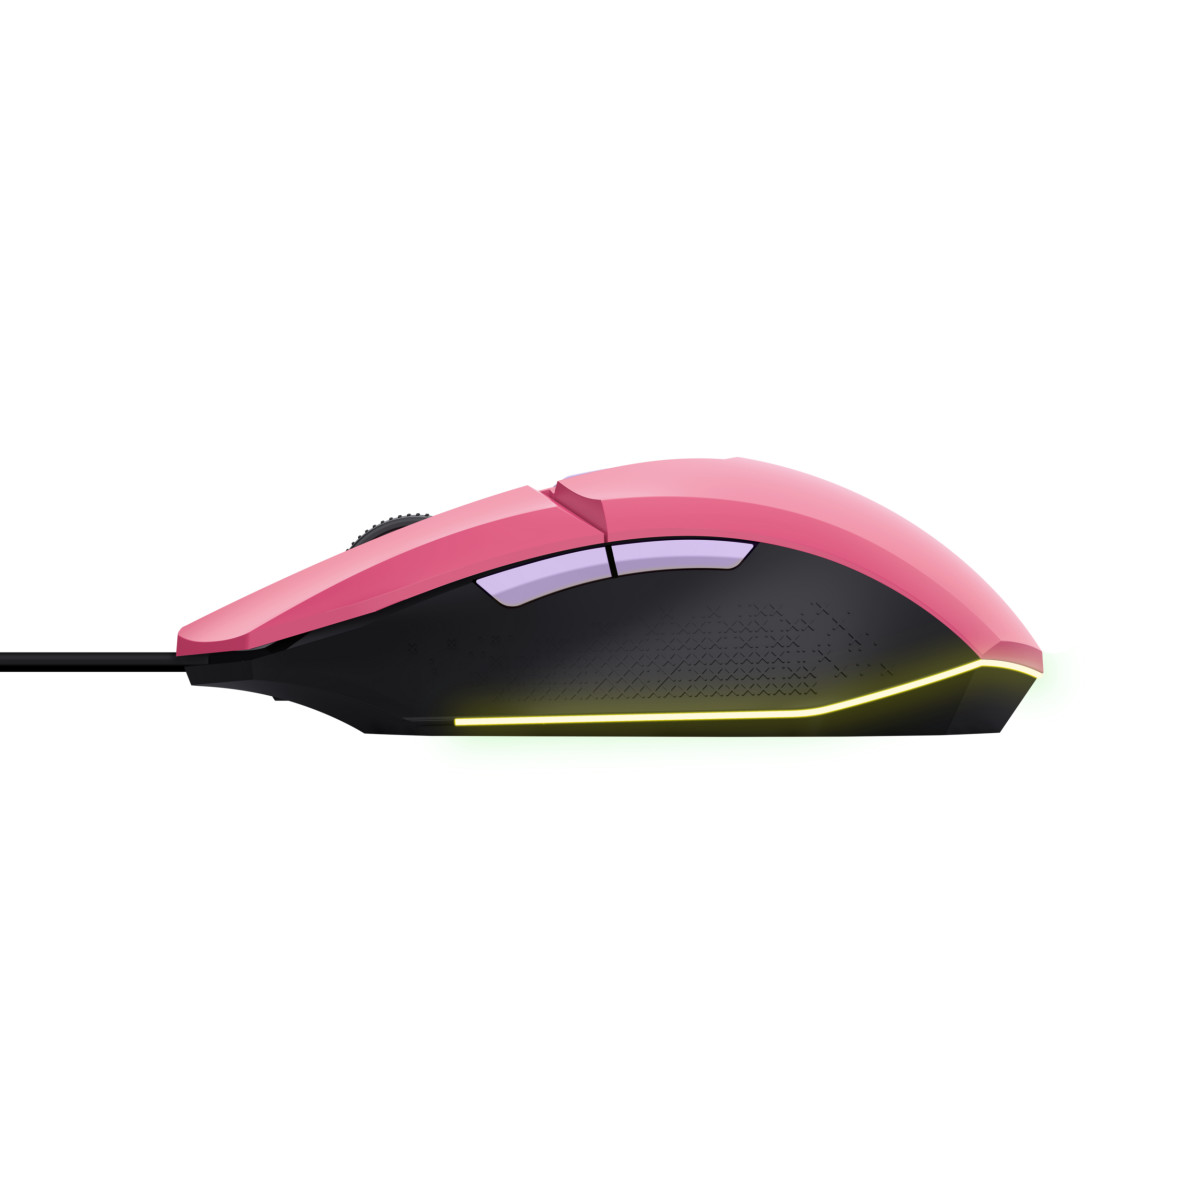 GXT109P Felox Gaming Mouse Pink